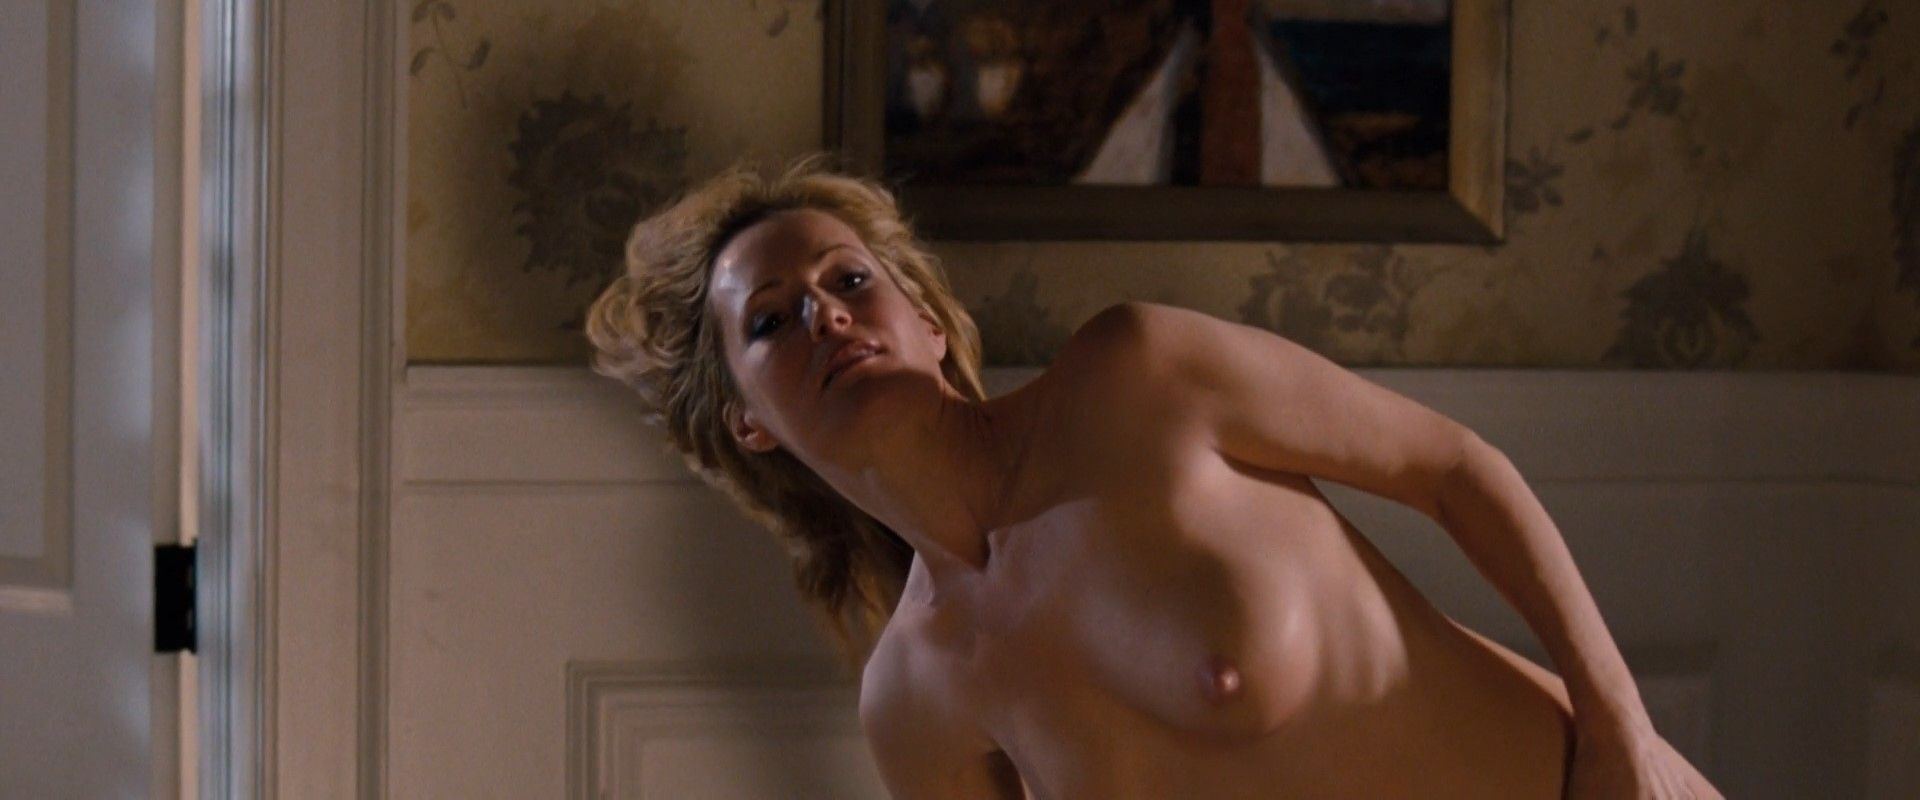 In our data base are several nude scenes with Leslie Mann. 